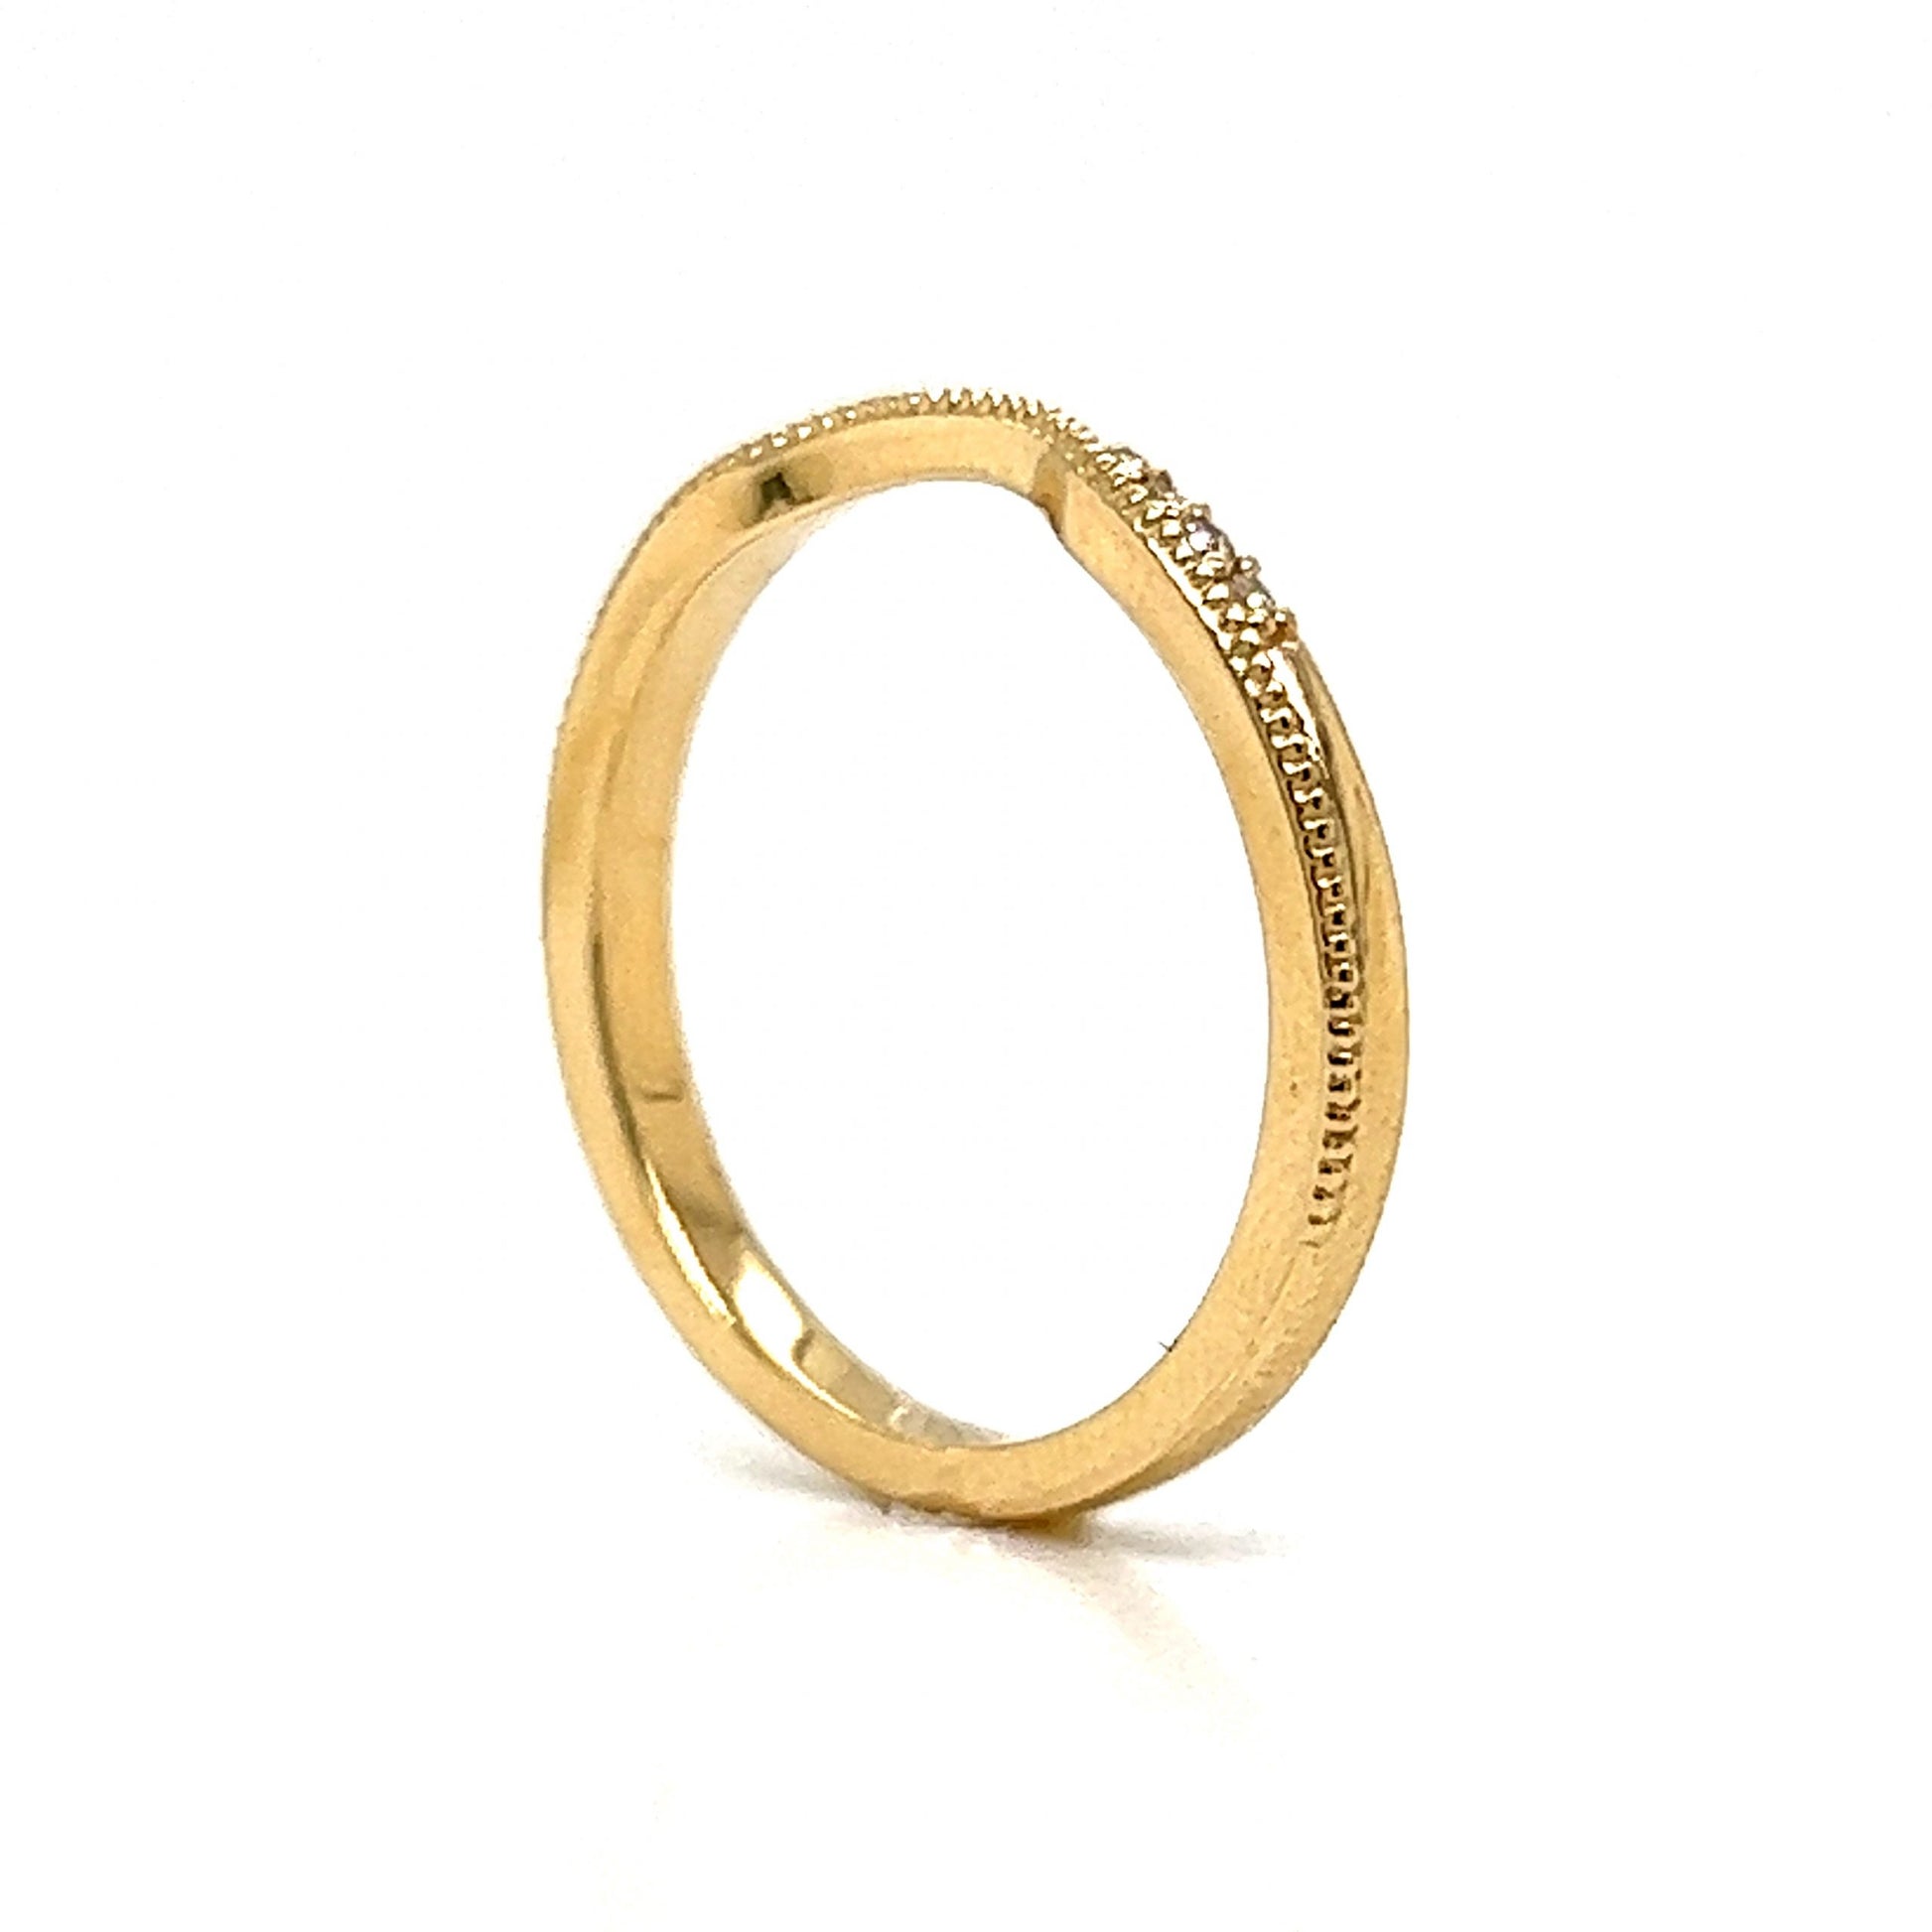 Slightly Curved Diamond Wedding Band in 14k Yellow Gold